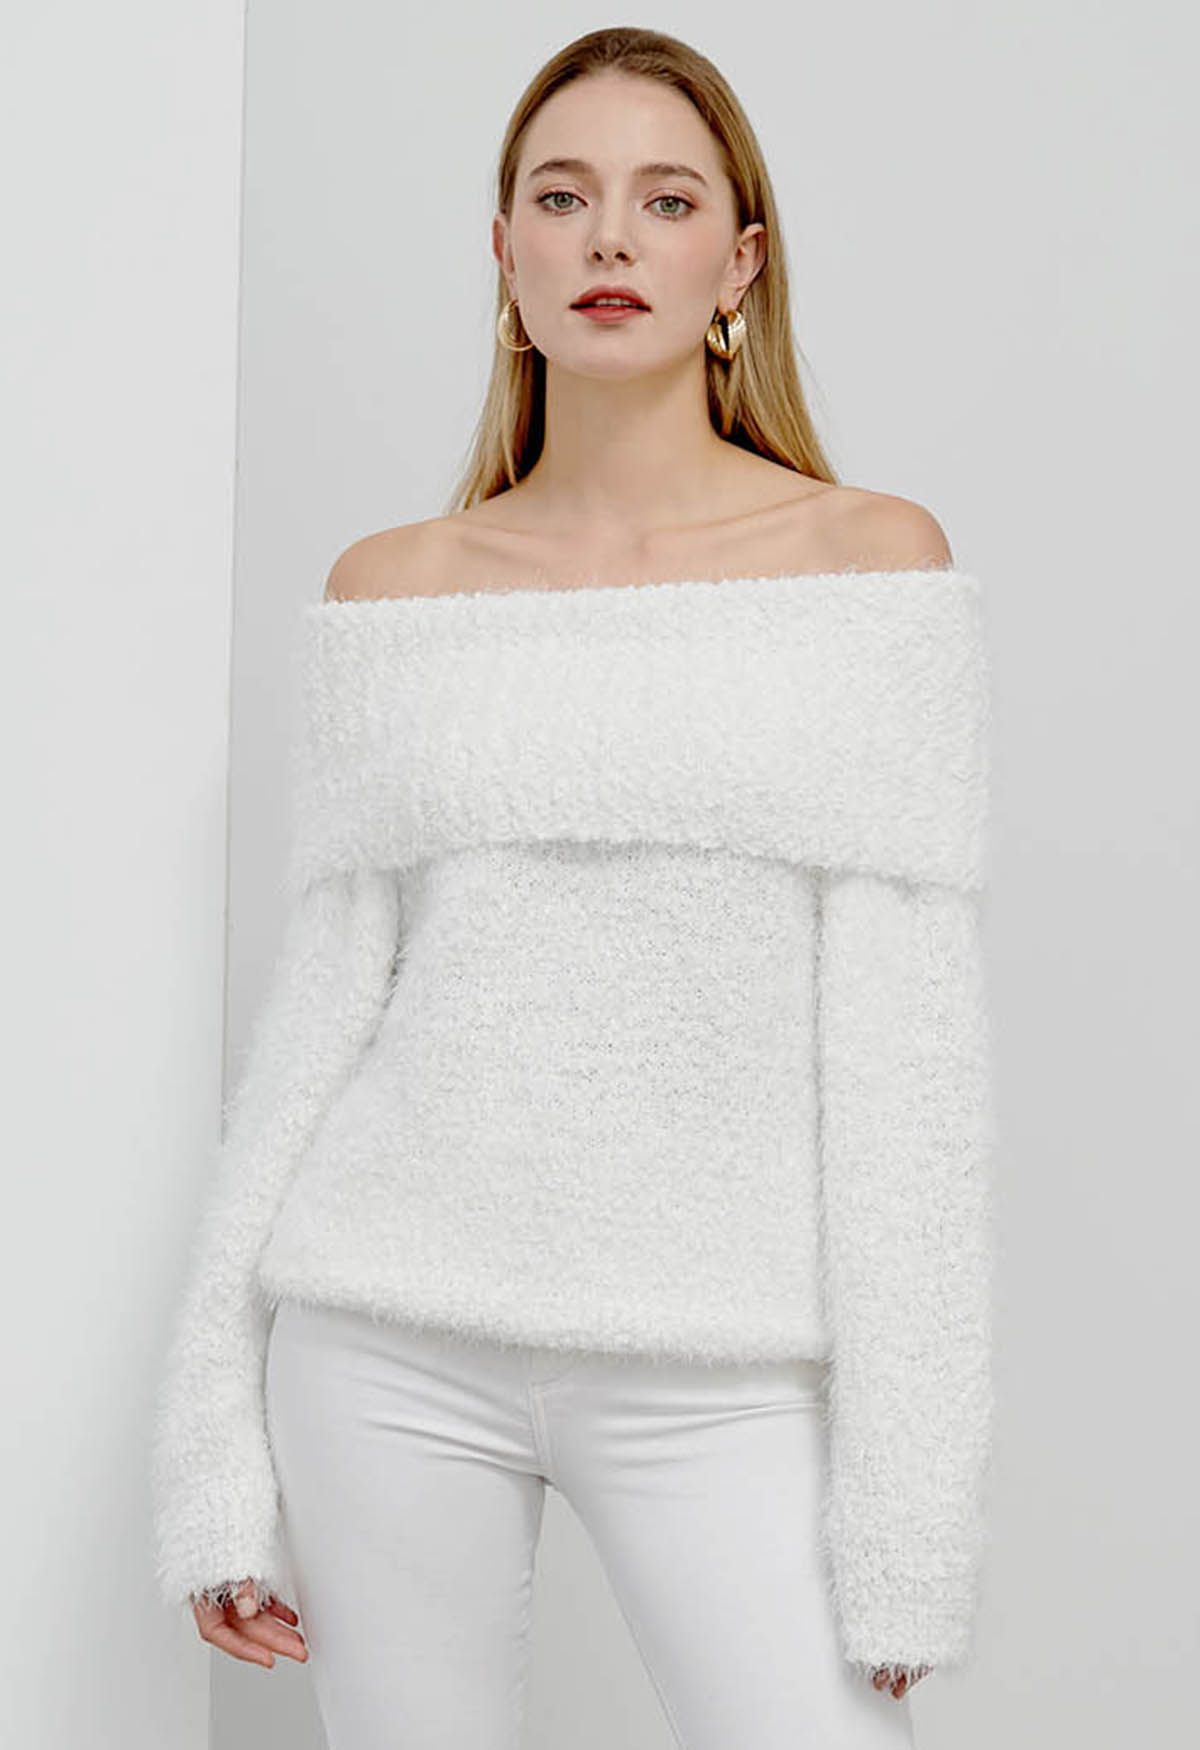 Folded Fuzzy Knit Sweater in White - Retro, Indie and Unique Fashion